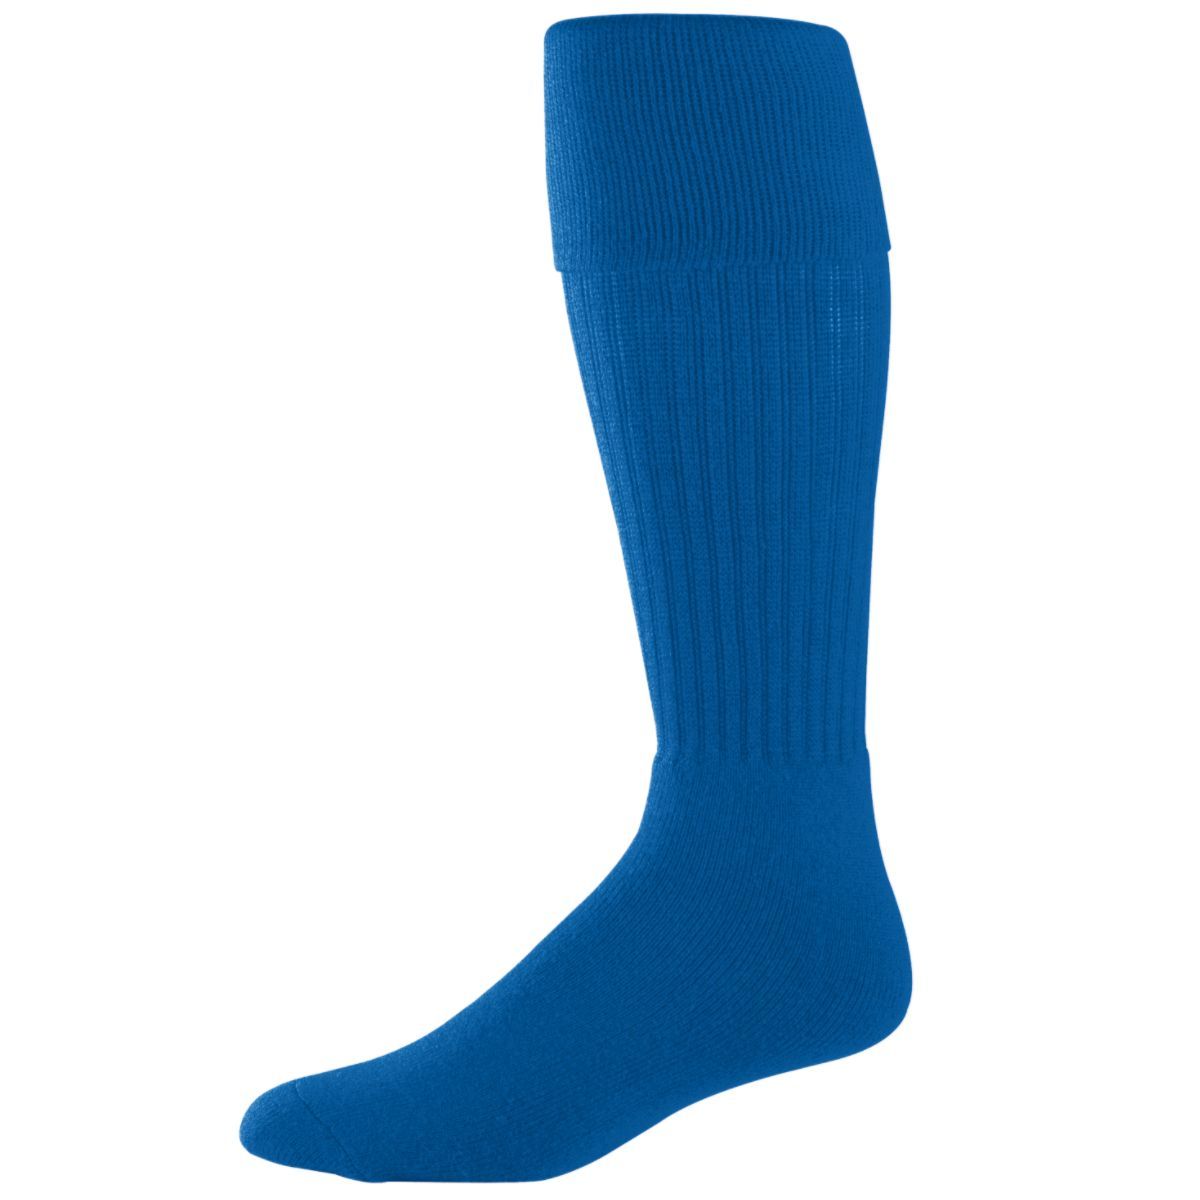 Augusta Sportswear Soccer Sock in Royal  -Part of the Accessories, Augusta-Products, Accessories-Socks, Soccer, All-Sports-1 product lines at KanaleyCreations.com